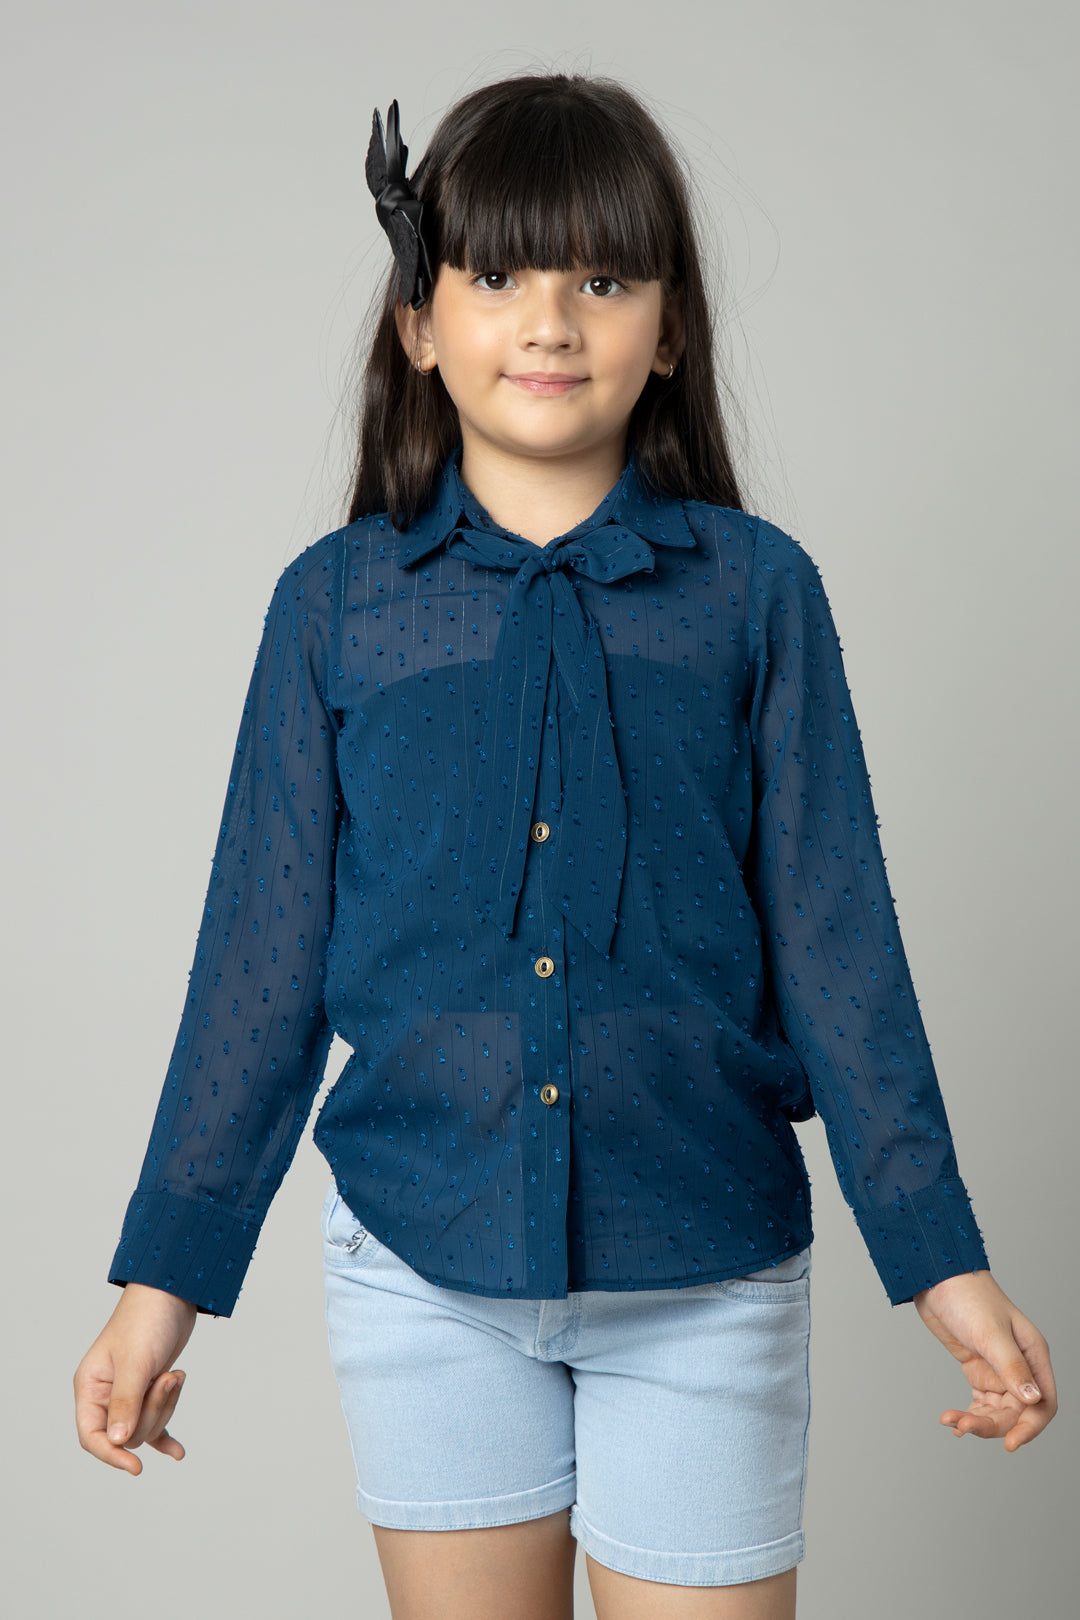 Tie-up Neck Spread Collar Shirt For Girls